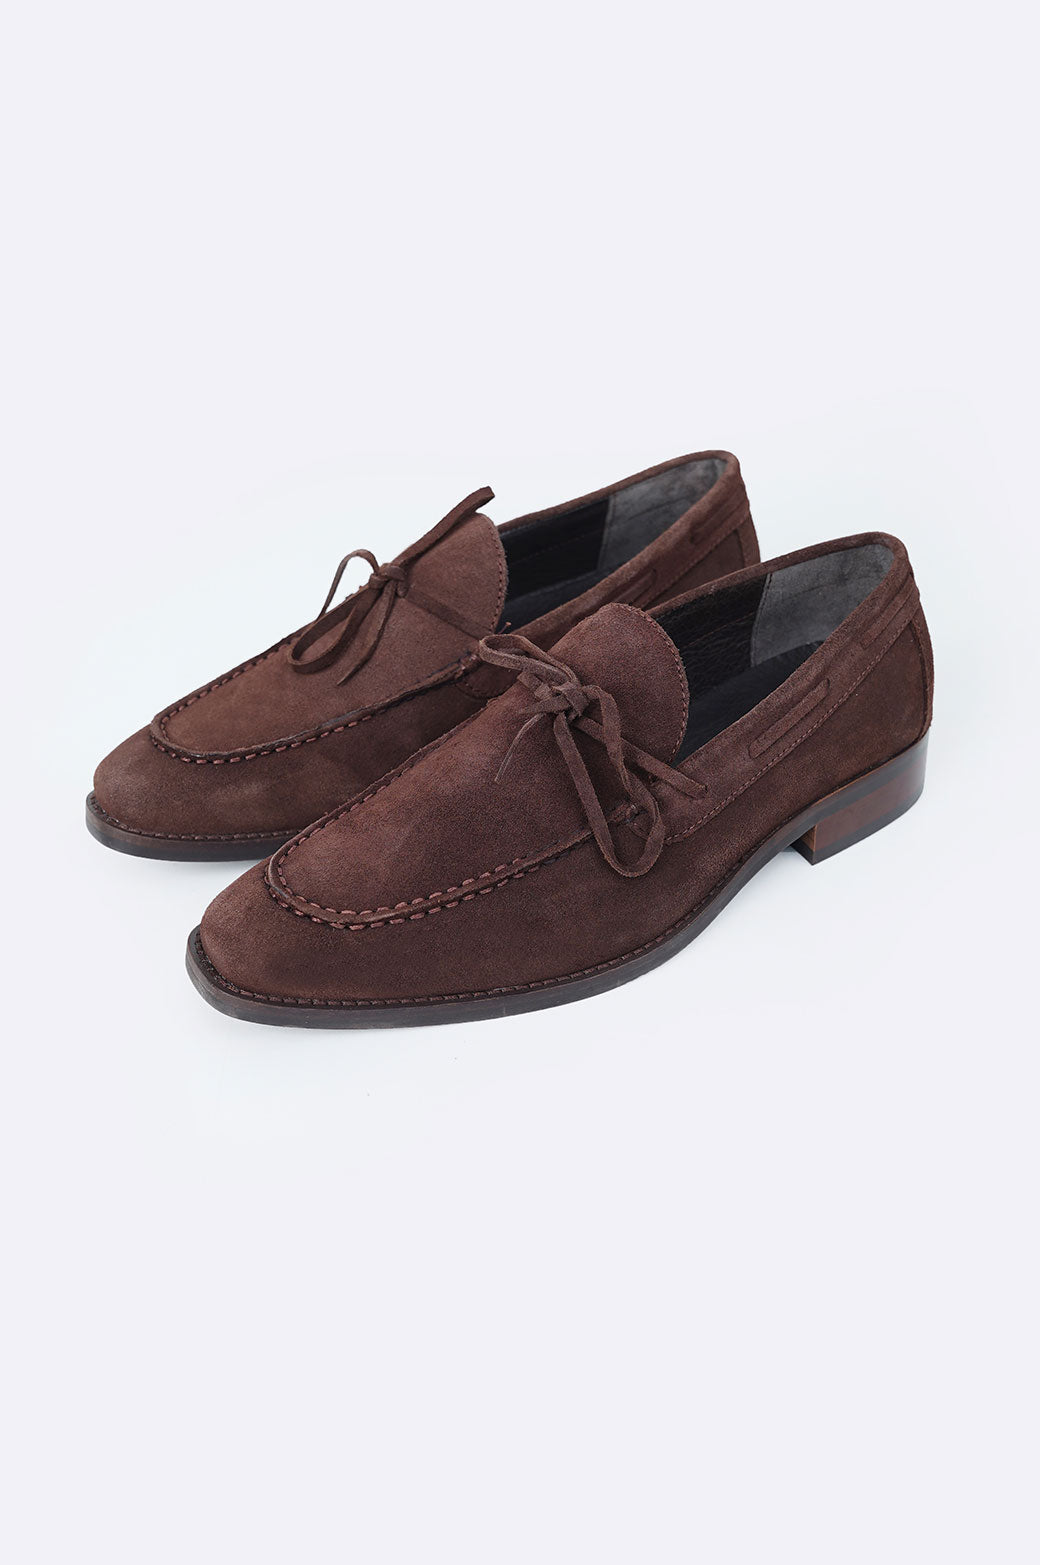 CHOCOLATE BOW LEATHER LOAFERS